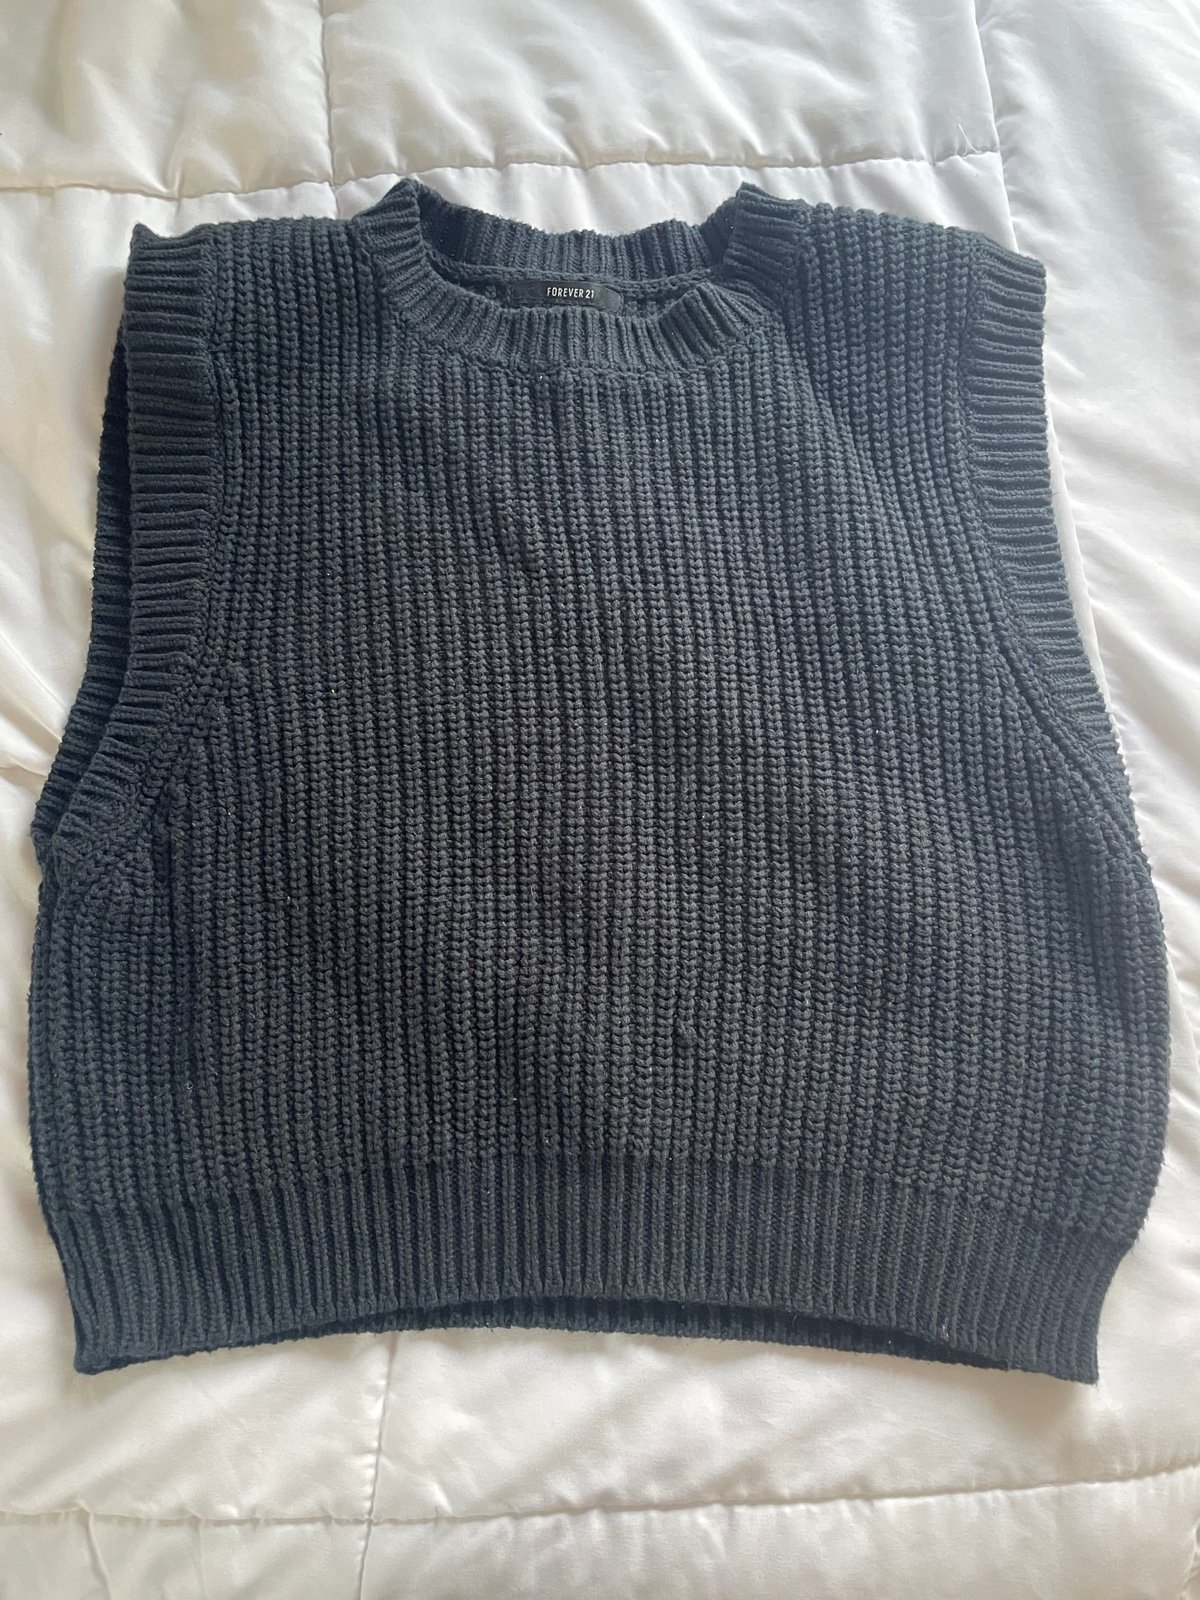 save up to 70% Black Knitted Sweater Vest | Forever 21 Lk78nwZ12 Everyday Low Prices